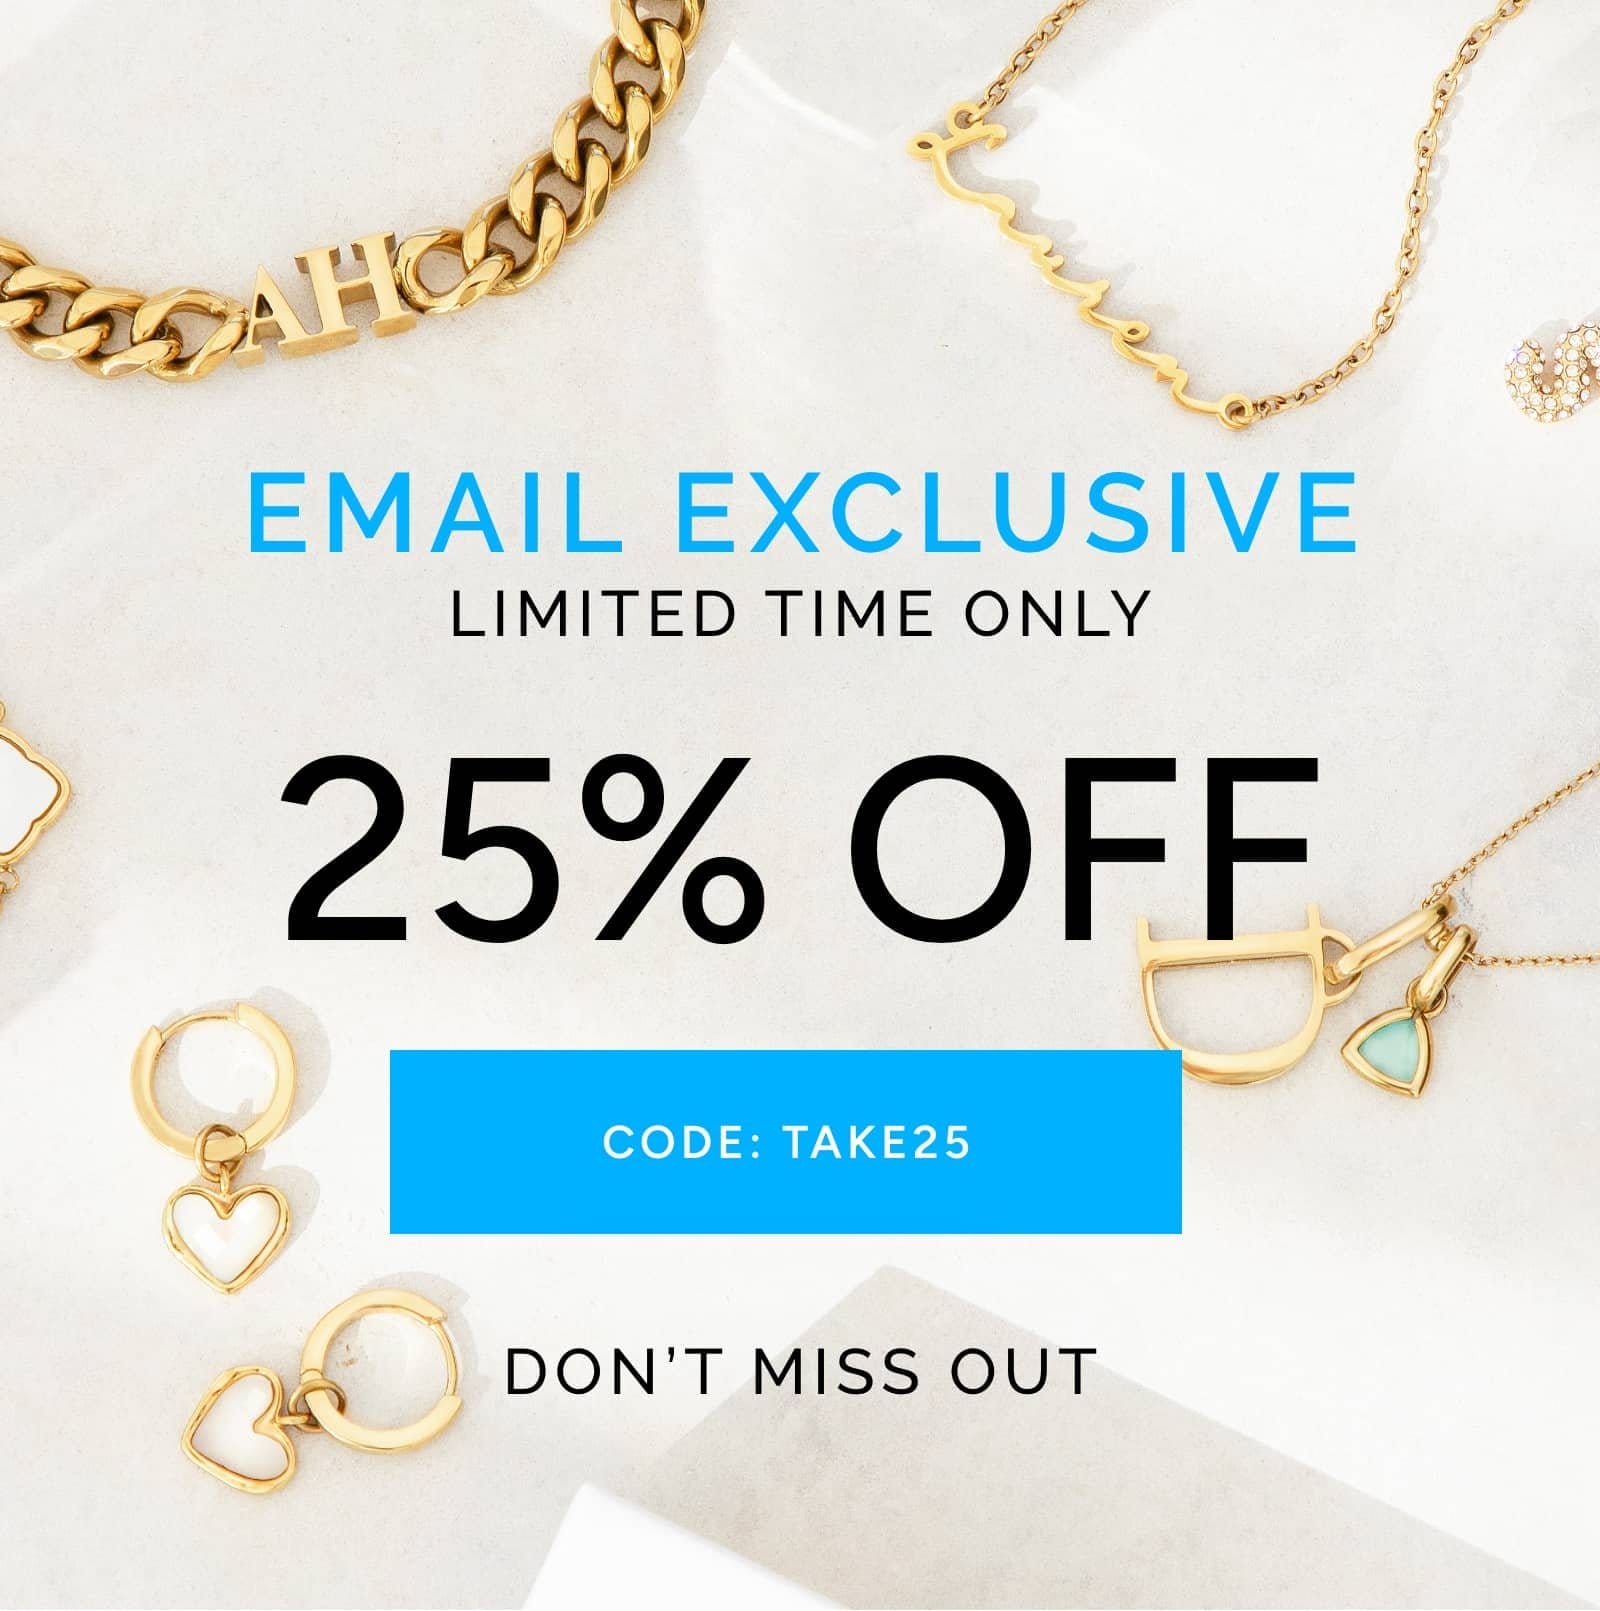 Email exclusive